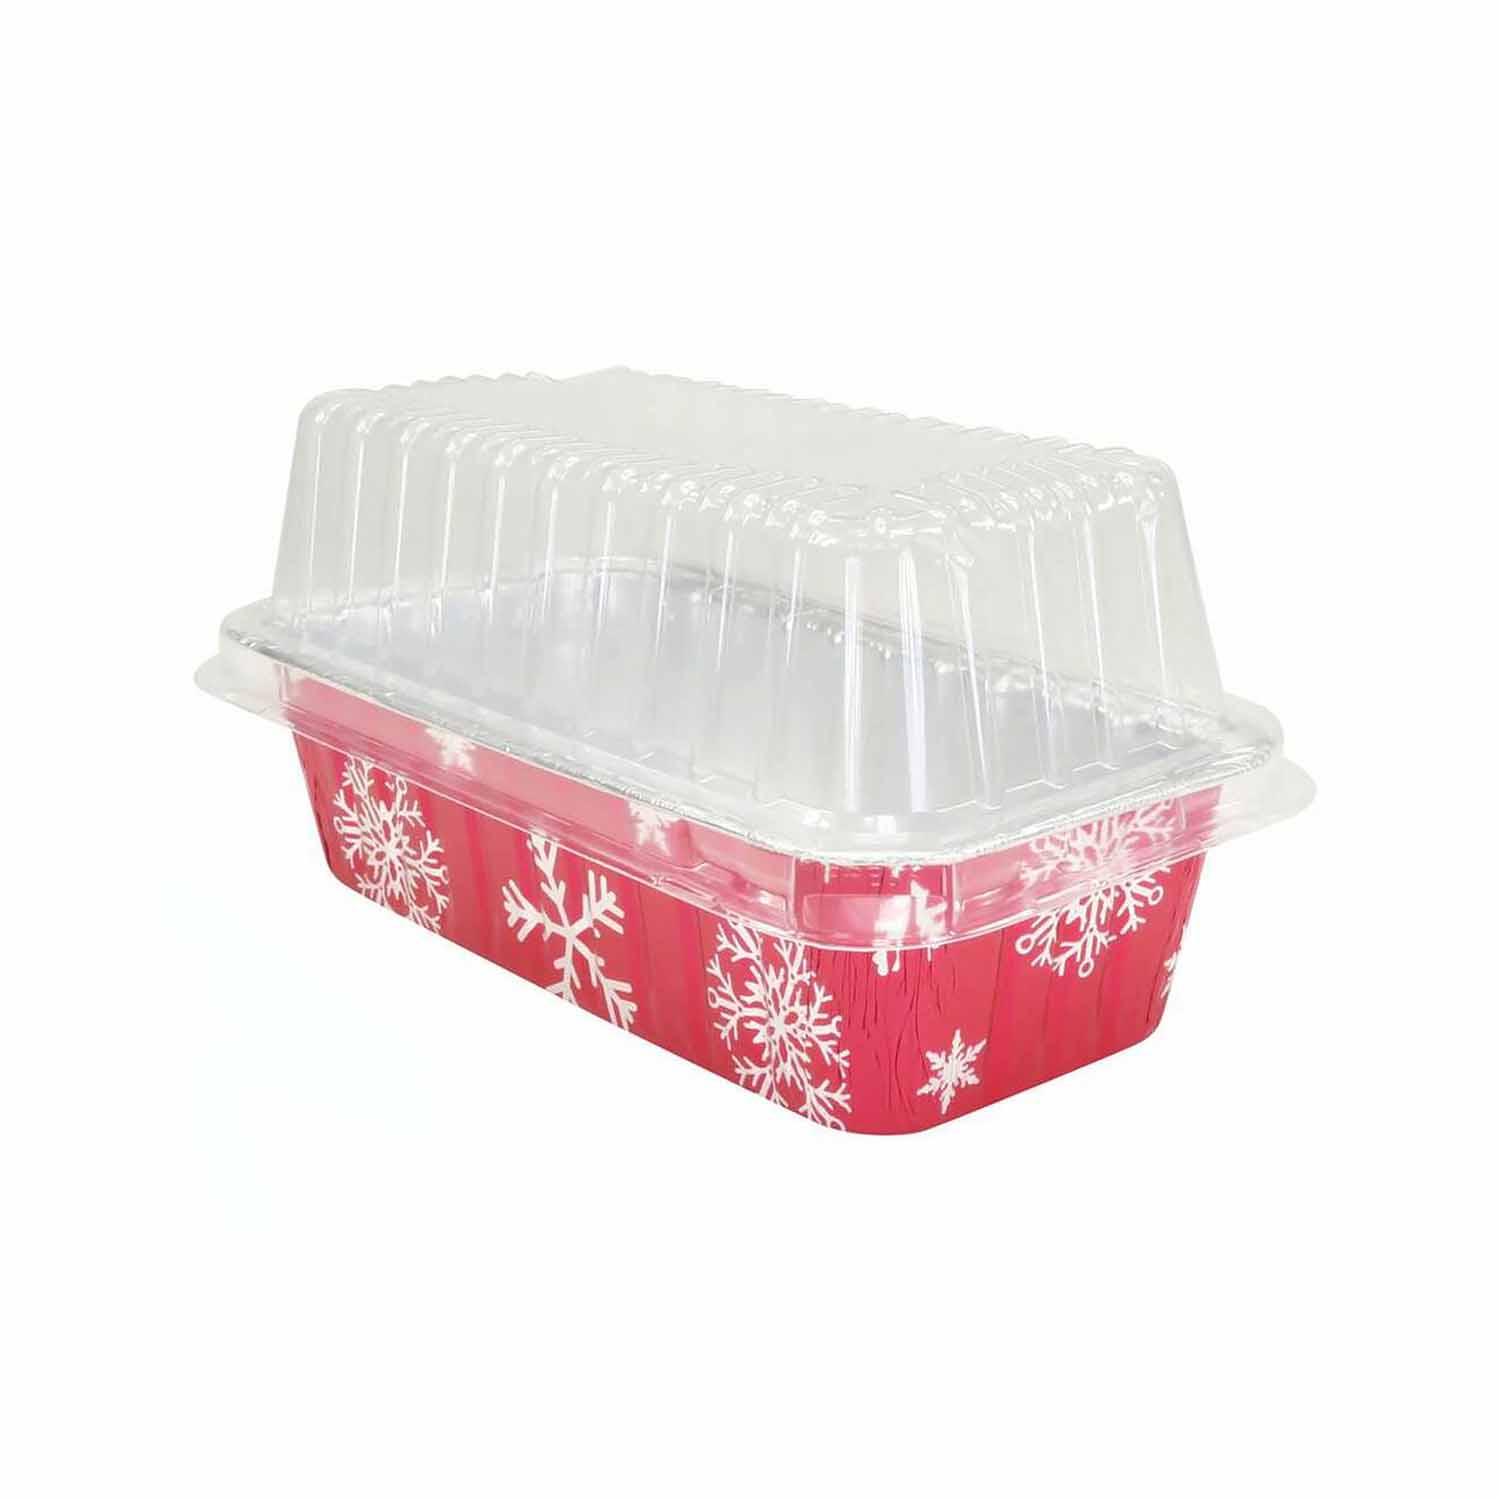 1 LB Snowflake Mini Foil Loaf Pan with Dome Lid